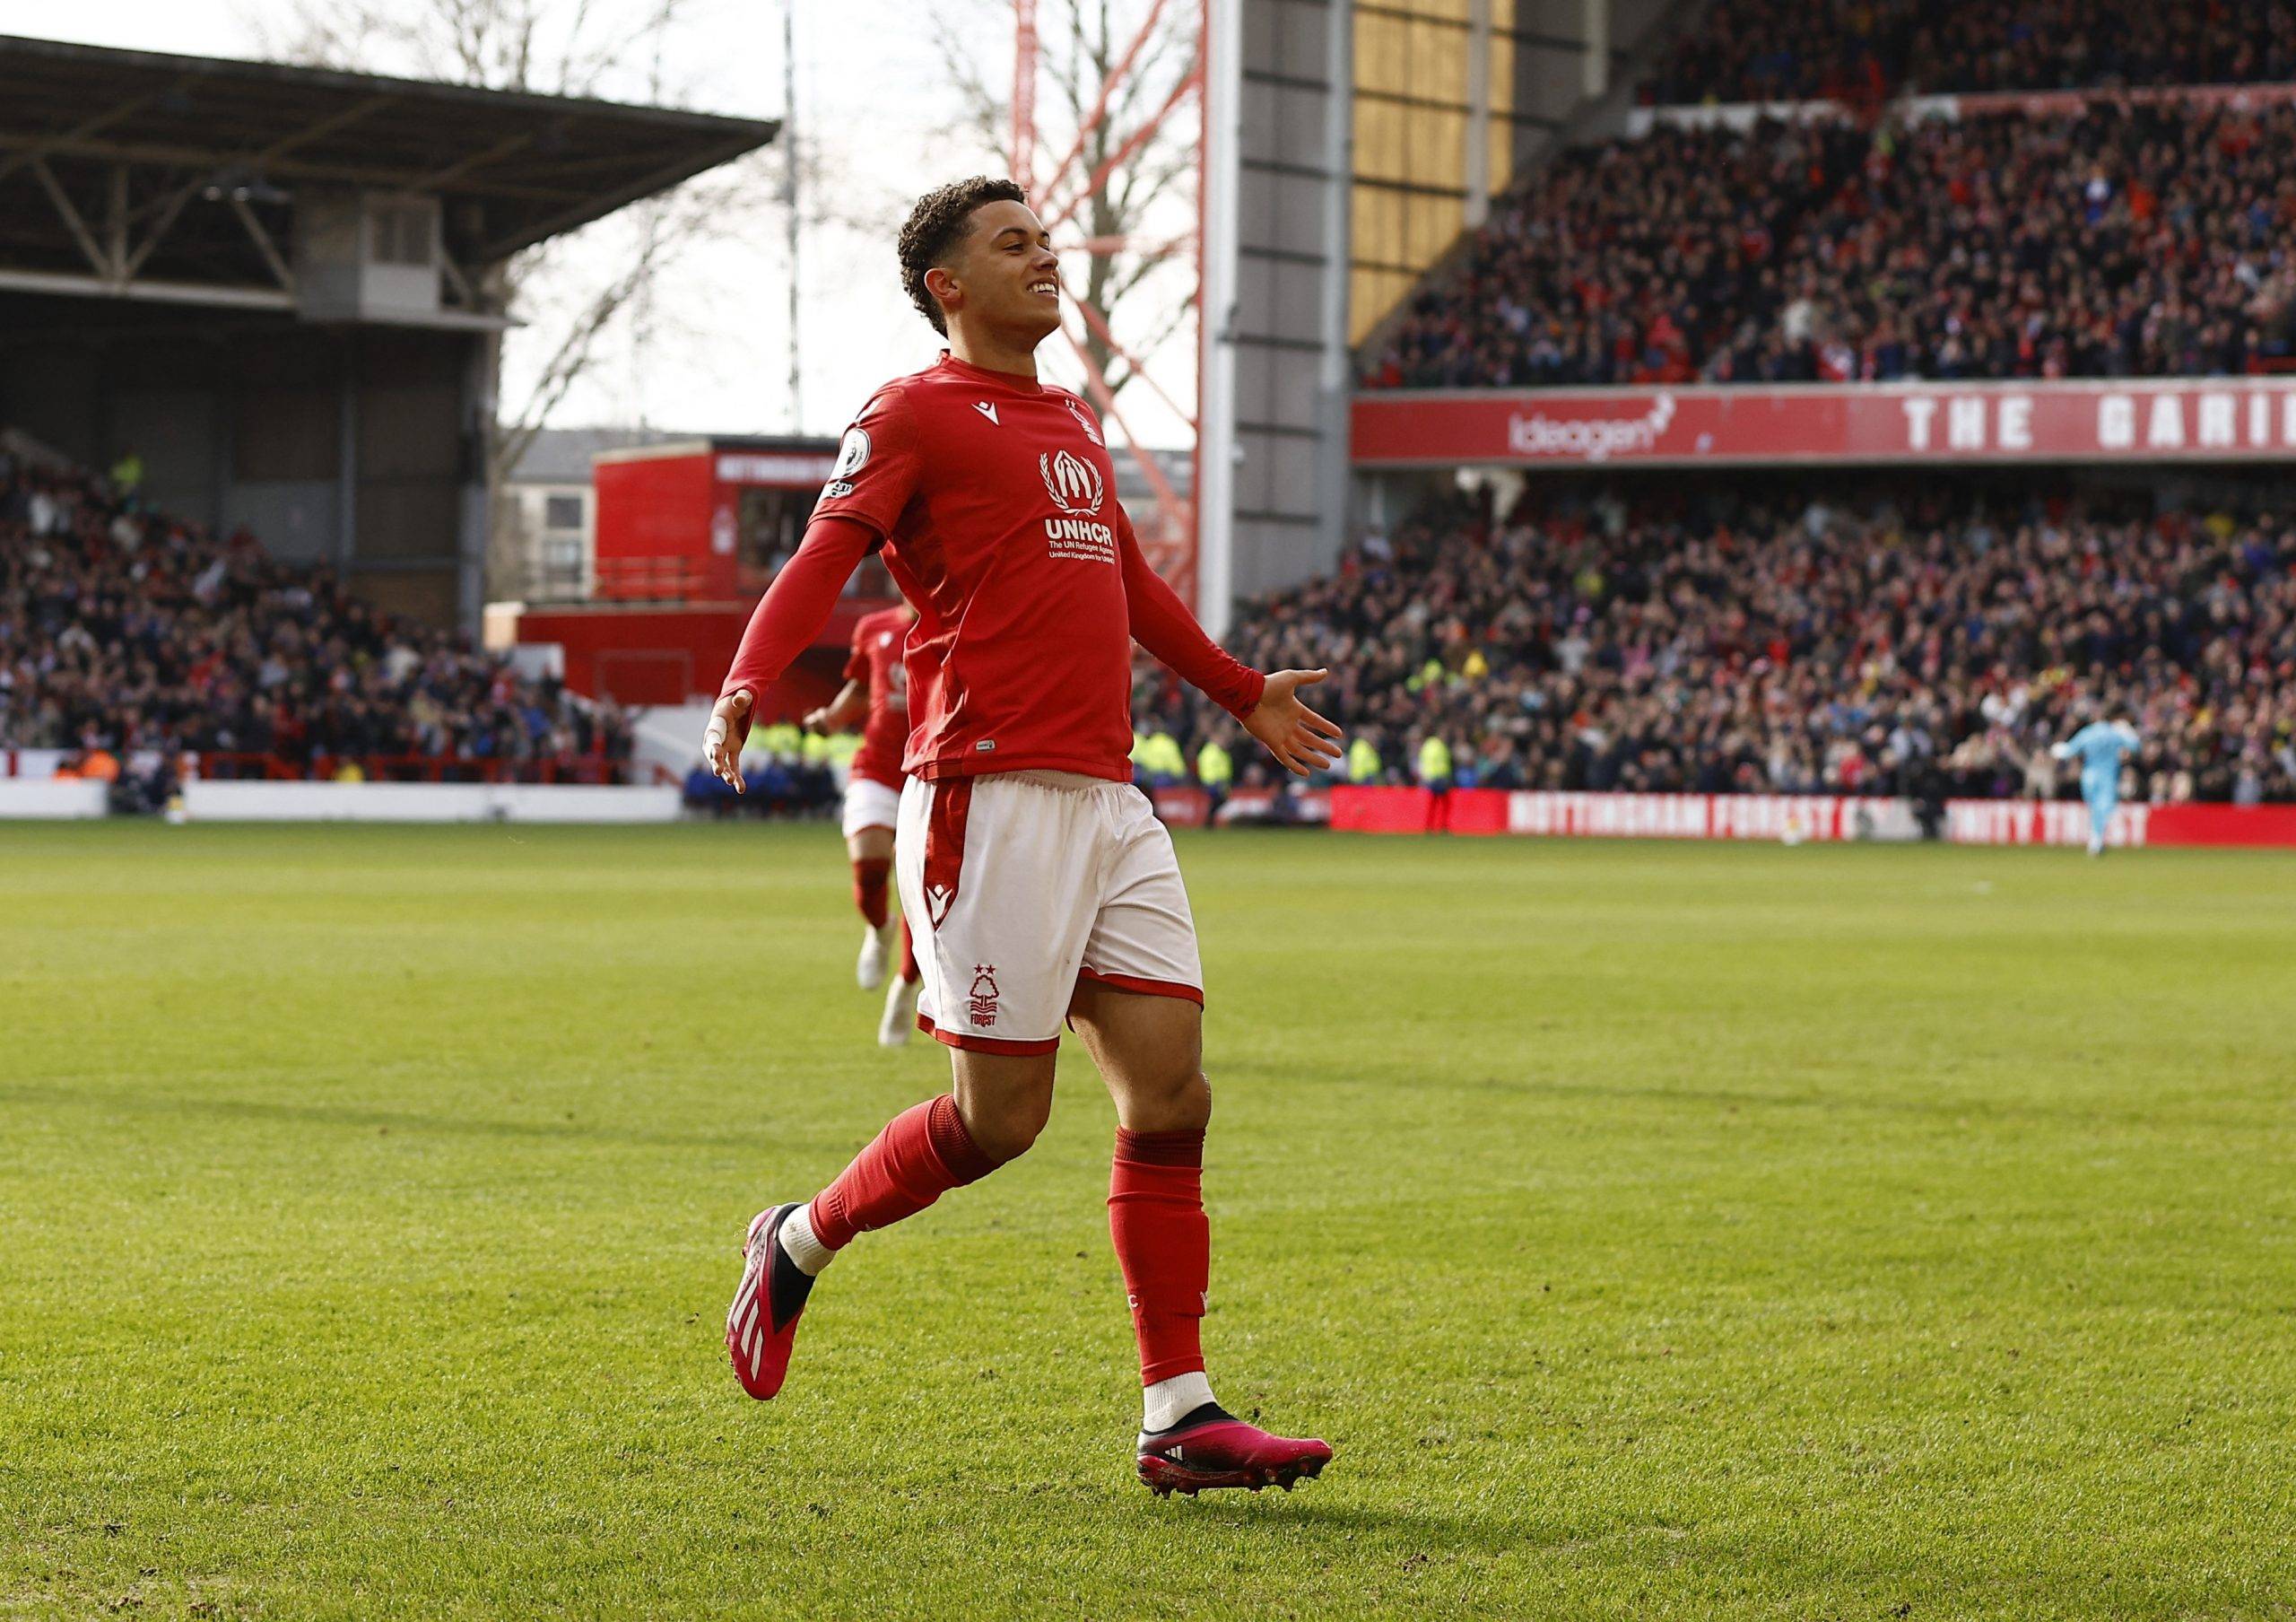 Nottingham Forest will do 'everything' to keep Brennan Johnson - Follow up